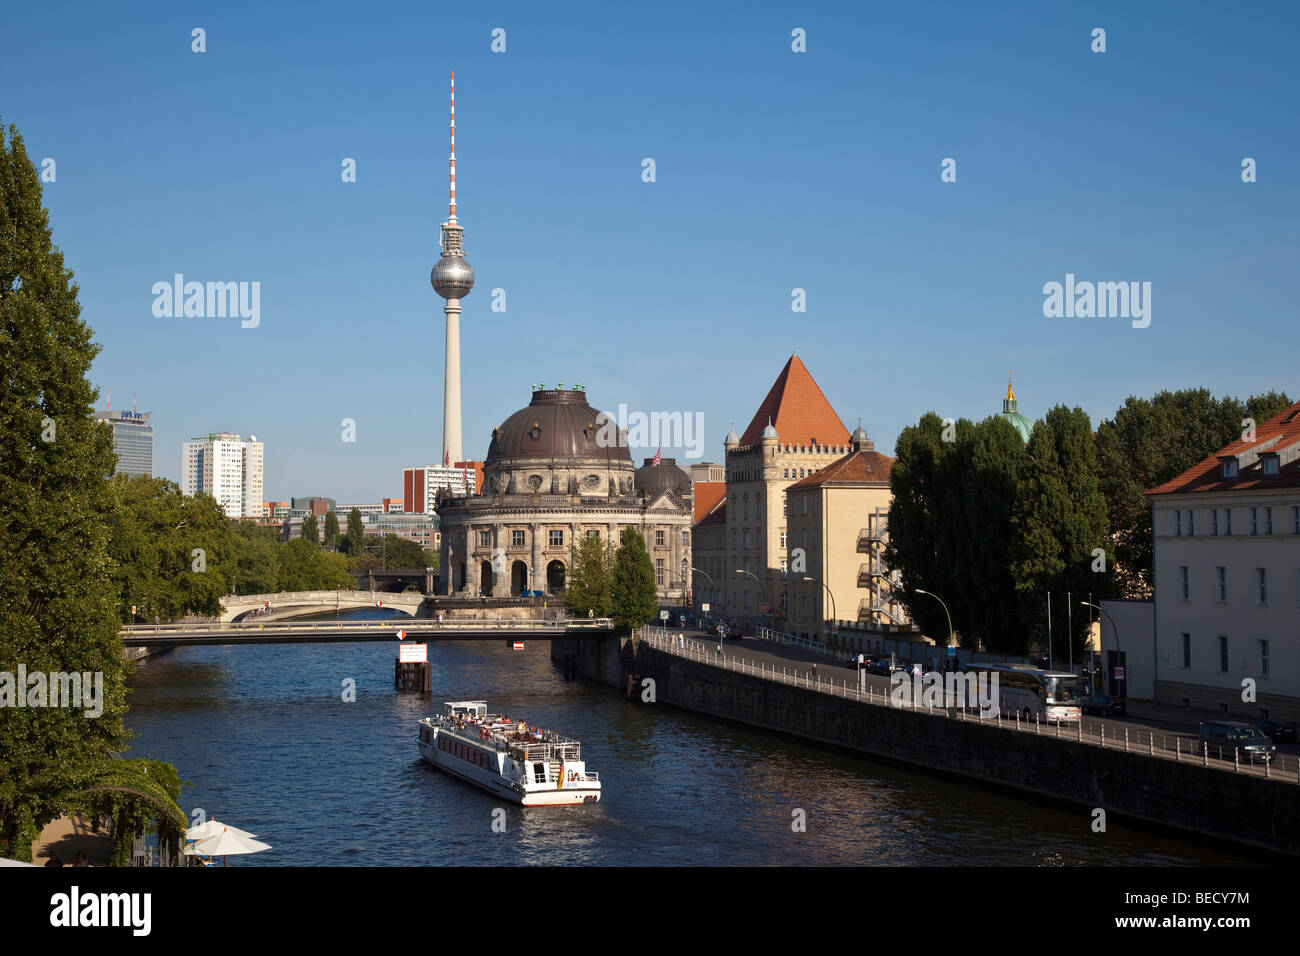 The river Spree with a tourist boat. In the background are the Bode Museum and the television tower. Stock Photo